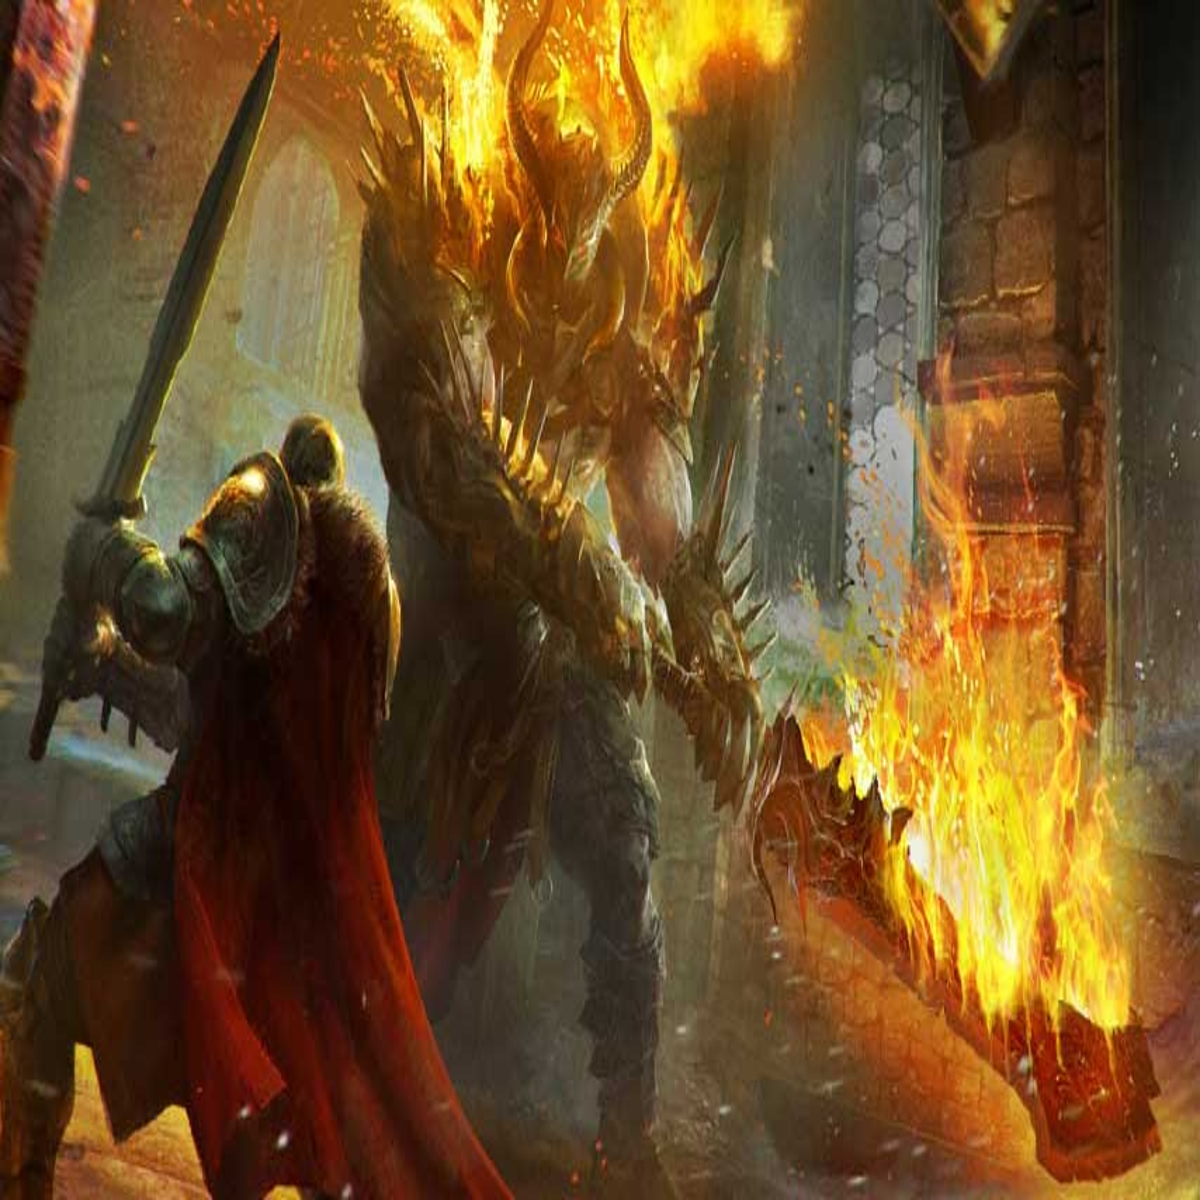 Lords of the Fallen has gone Gold